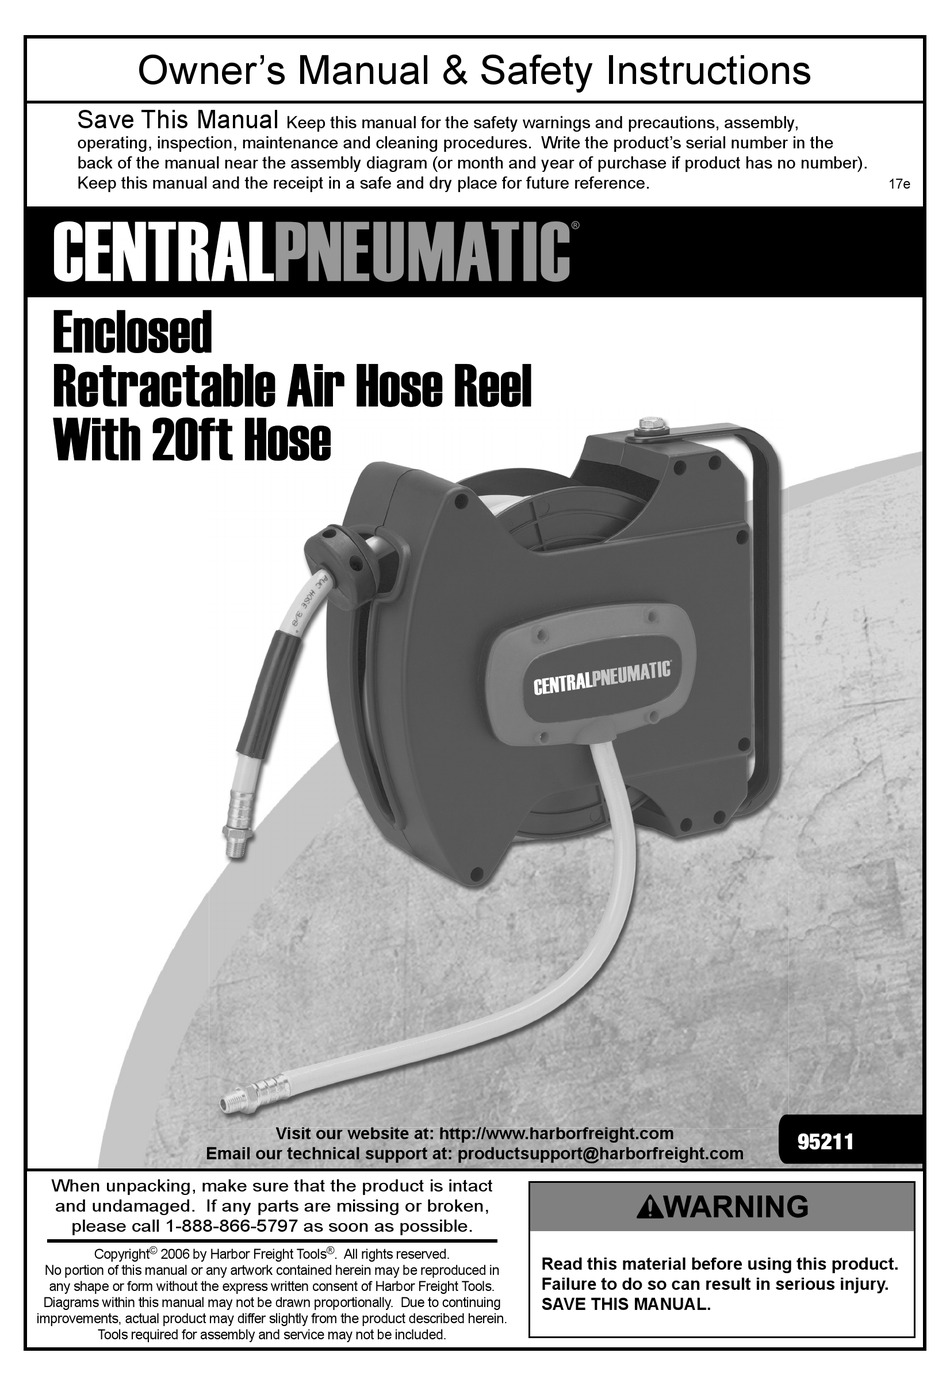 CENTRAL PNEUMATIC 95211 OWNER'S MANUAL AND SAFETY INSTRUCTIONS Pdf Download